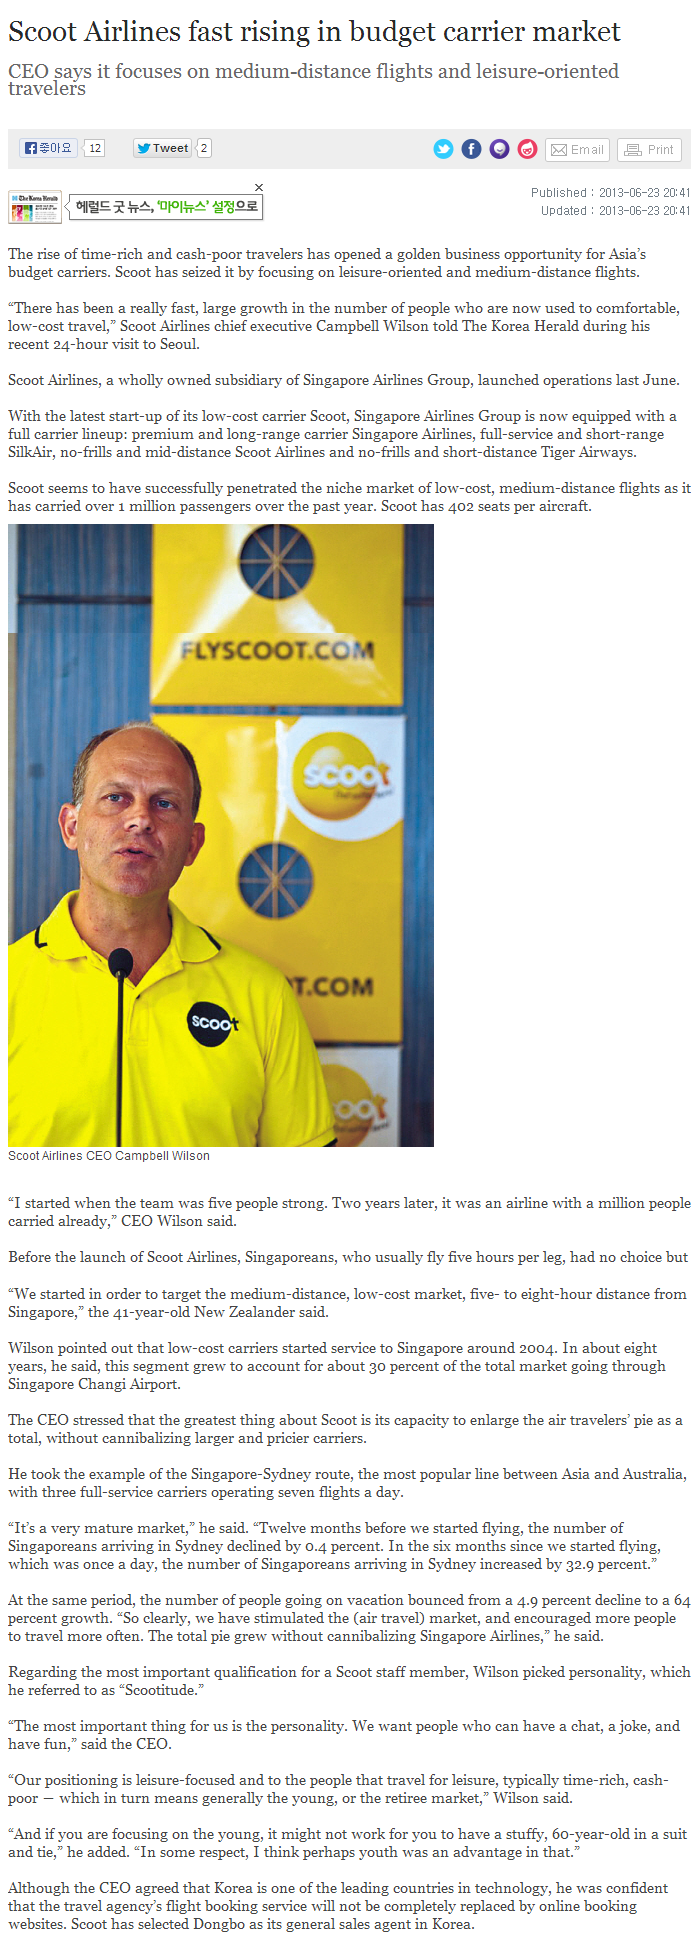 Scoot Airlines fast rising in budget carrier market The Korea Herald.png